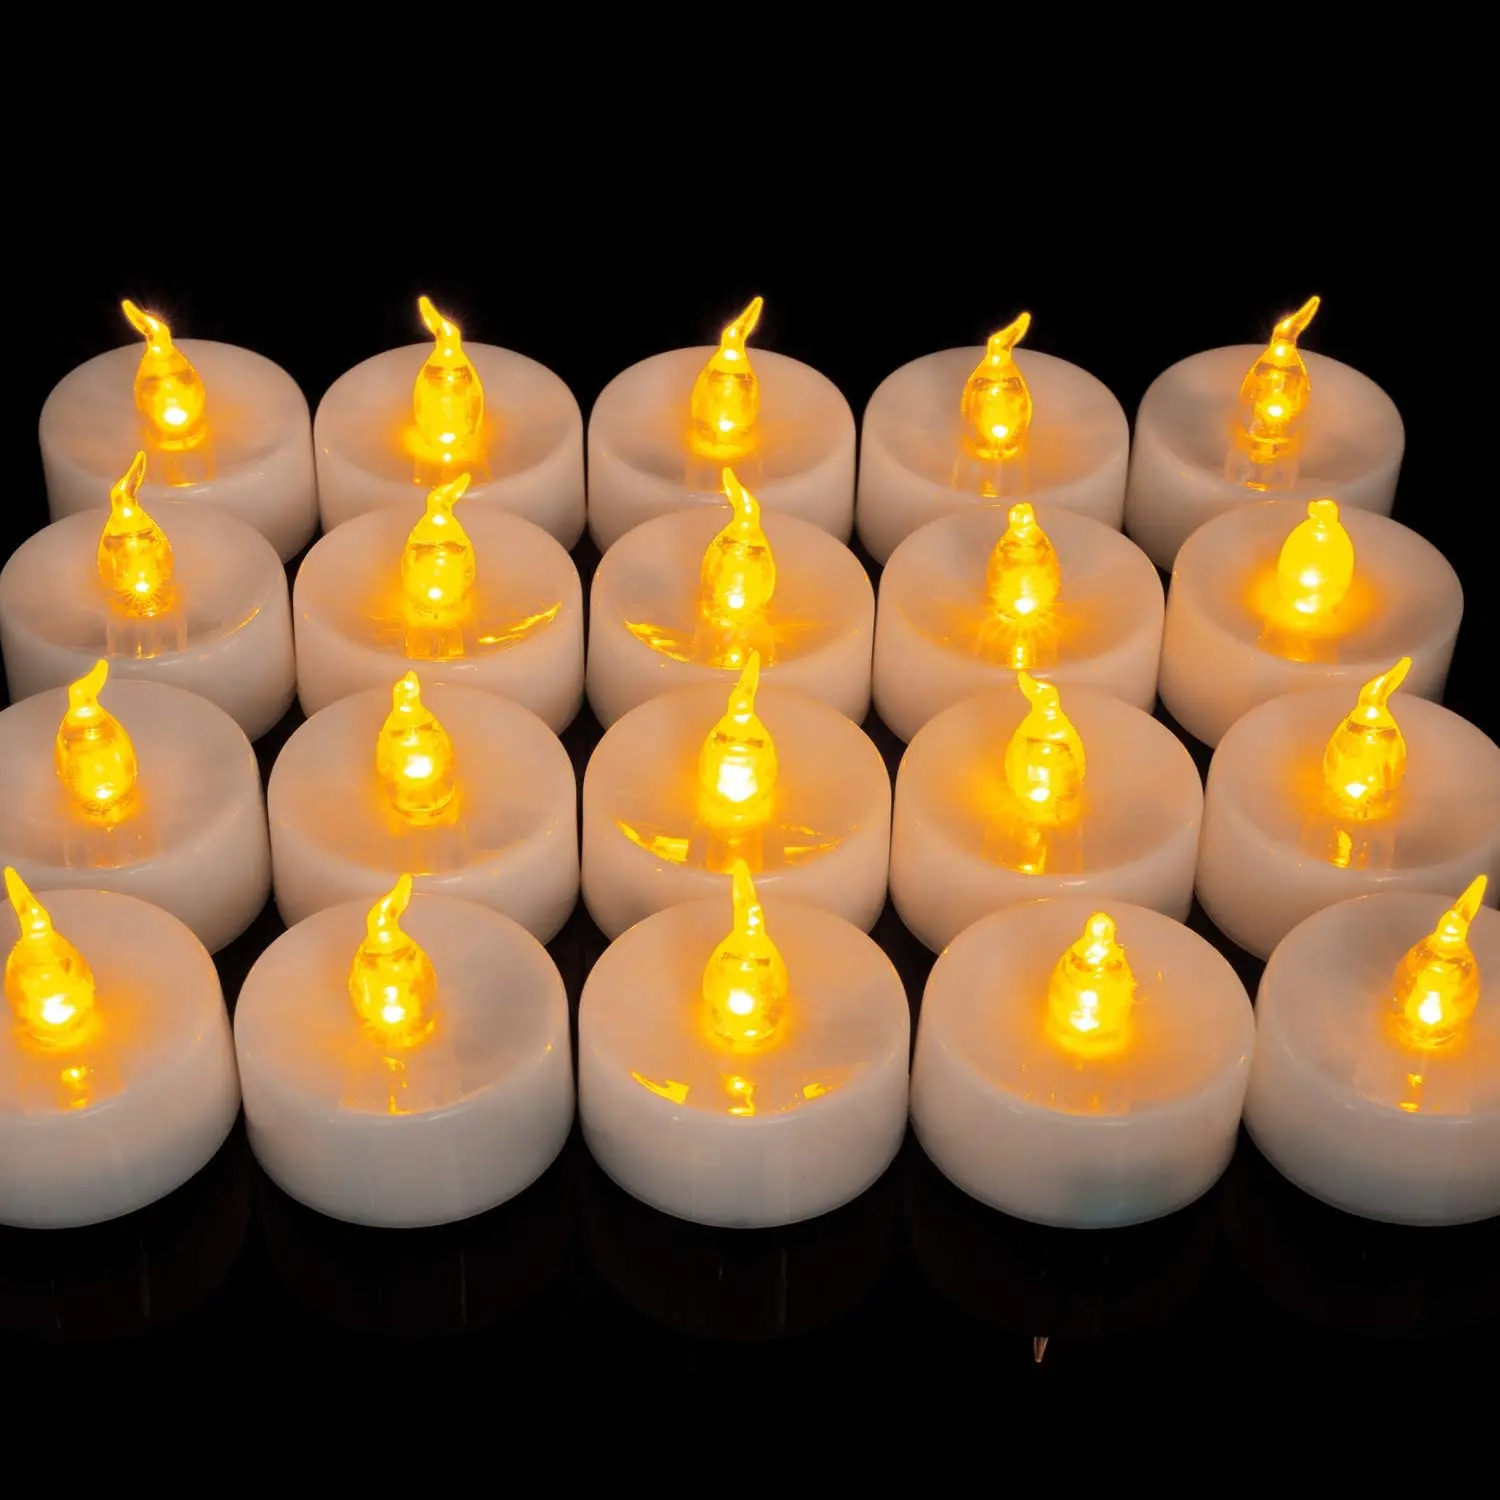 High Quality New Christmas Yellow Halloween Set of 24 Homemory LED Tea Lights Flameless Flickering Tealight Candle Factory